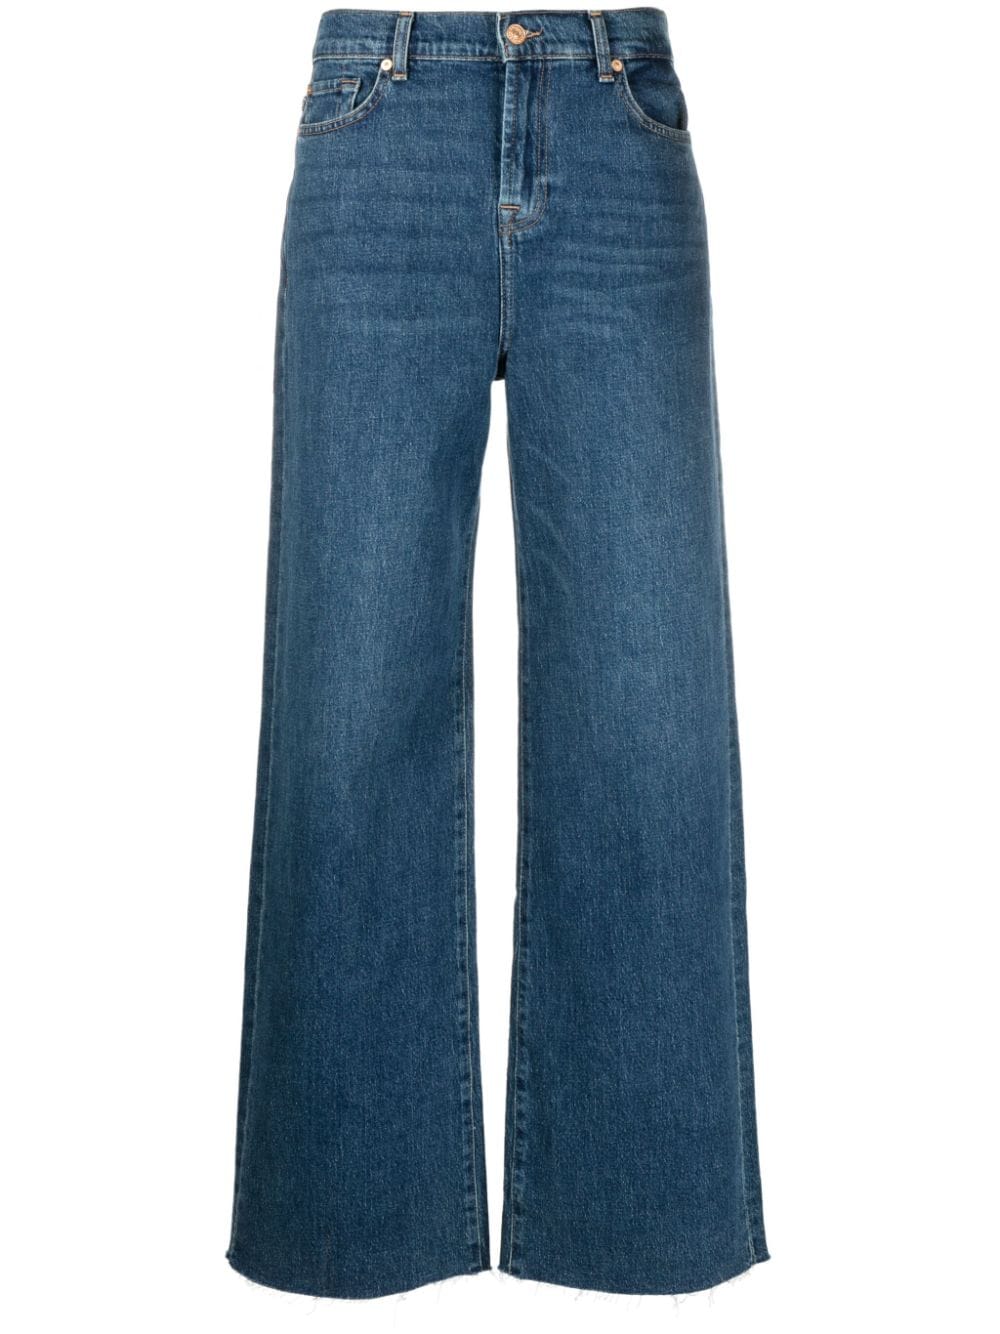 7 For All Mankind Scout high-rise wide-leg jeans - Blue von 7 For All Mankind